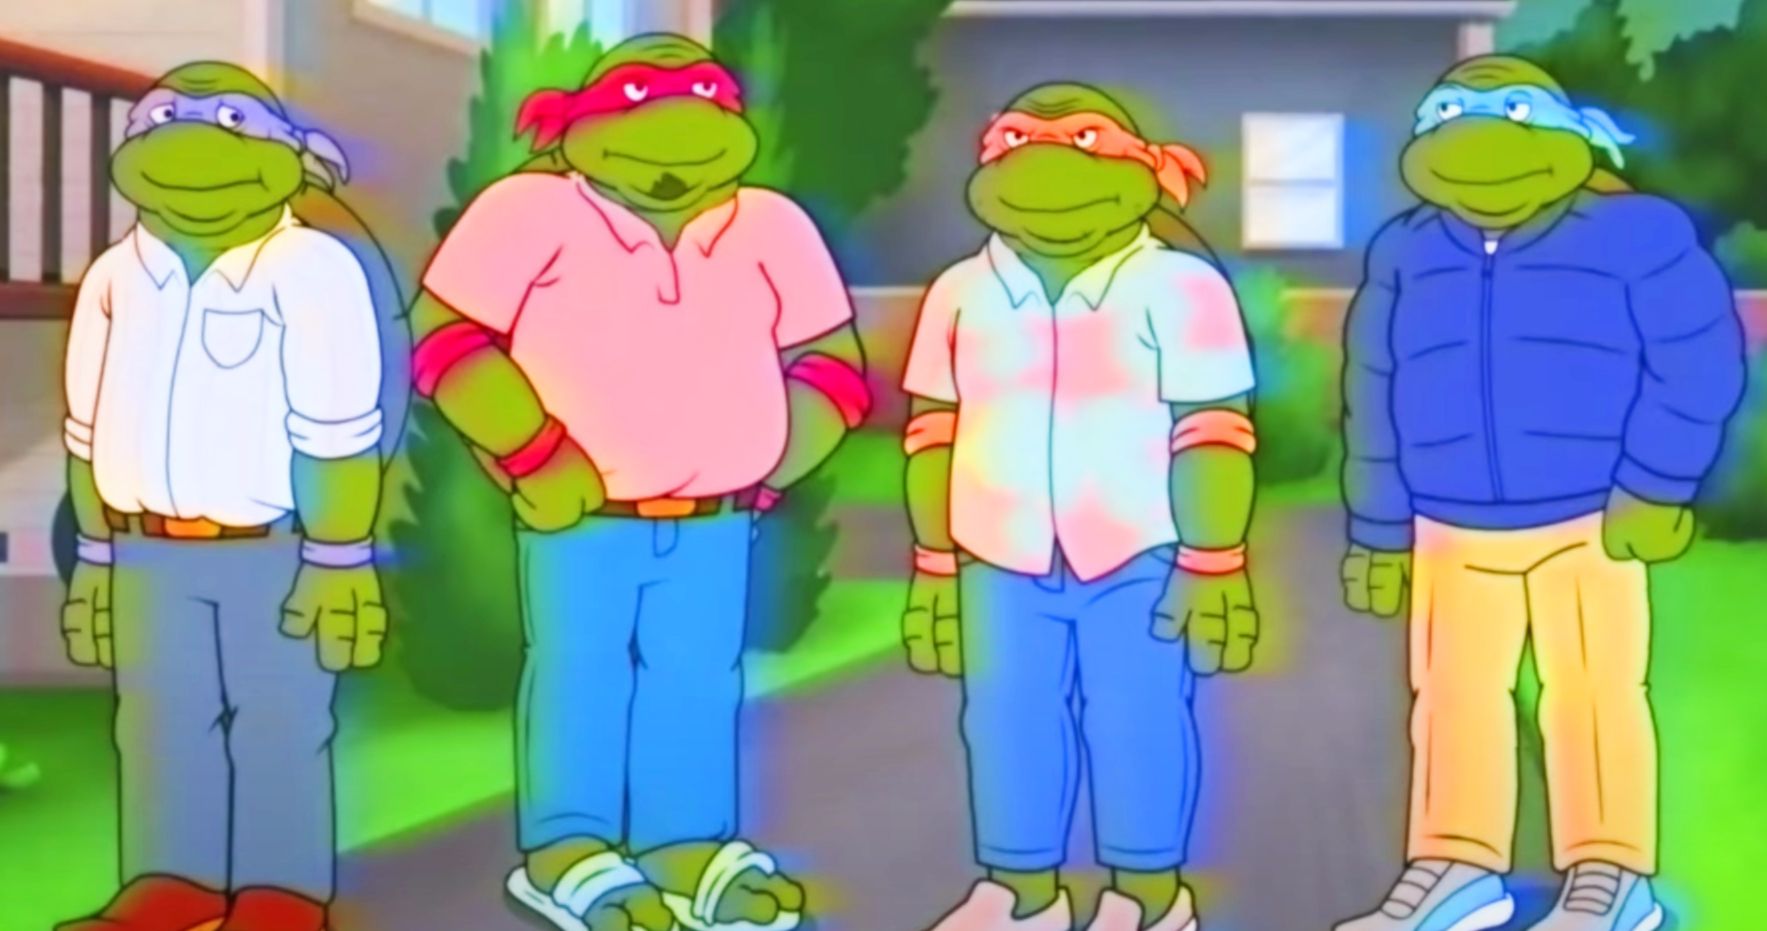 Teenage Mutant Ninja Turtles Become Middle-Aged Losers in SNL Animated Short